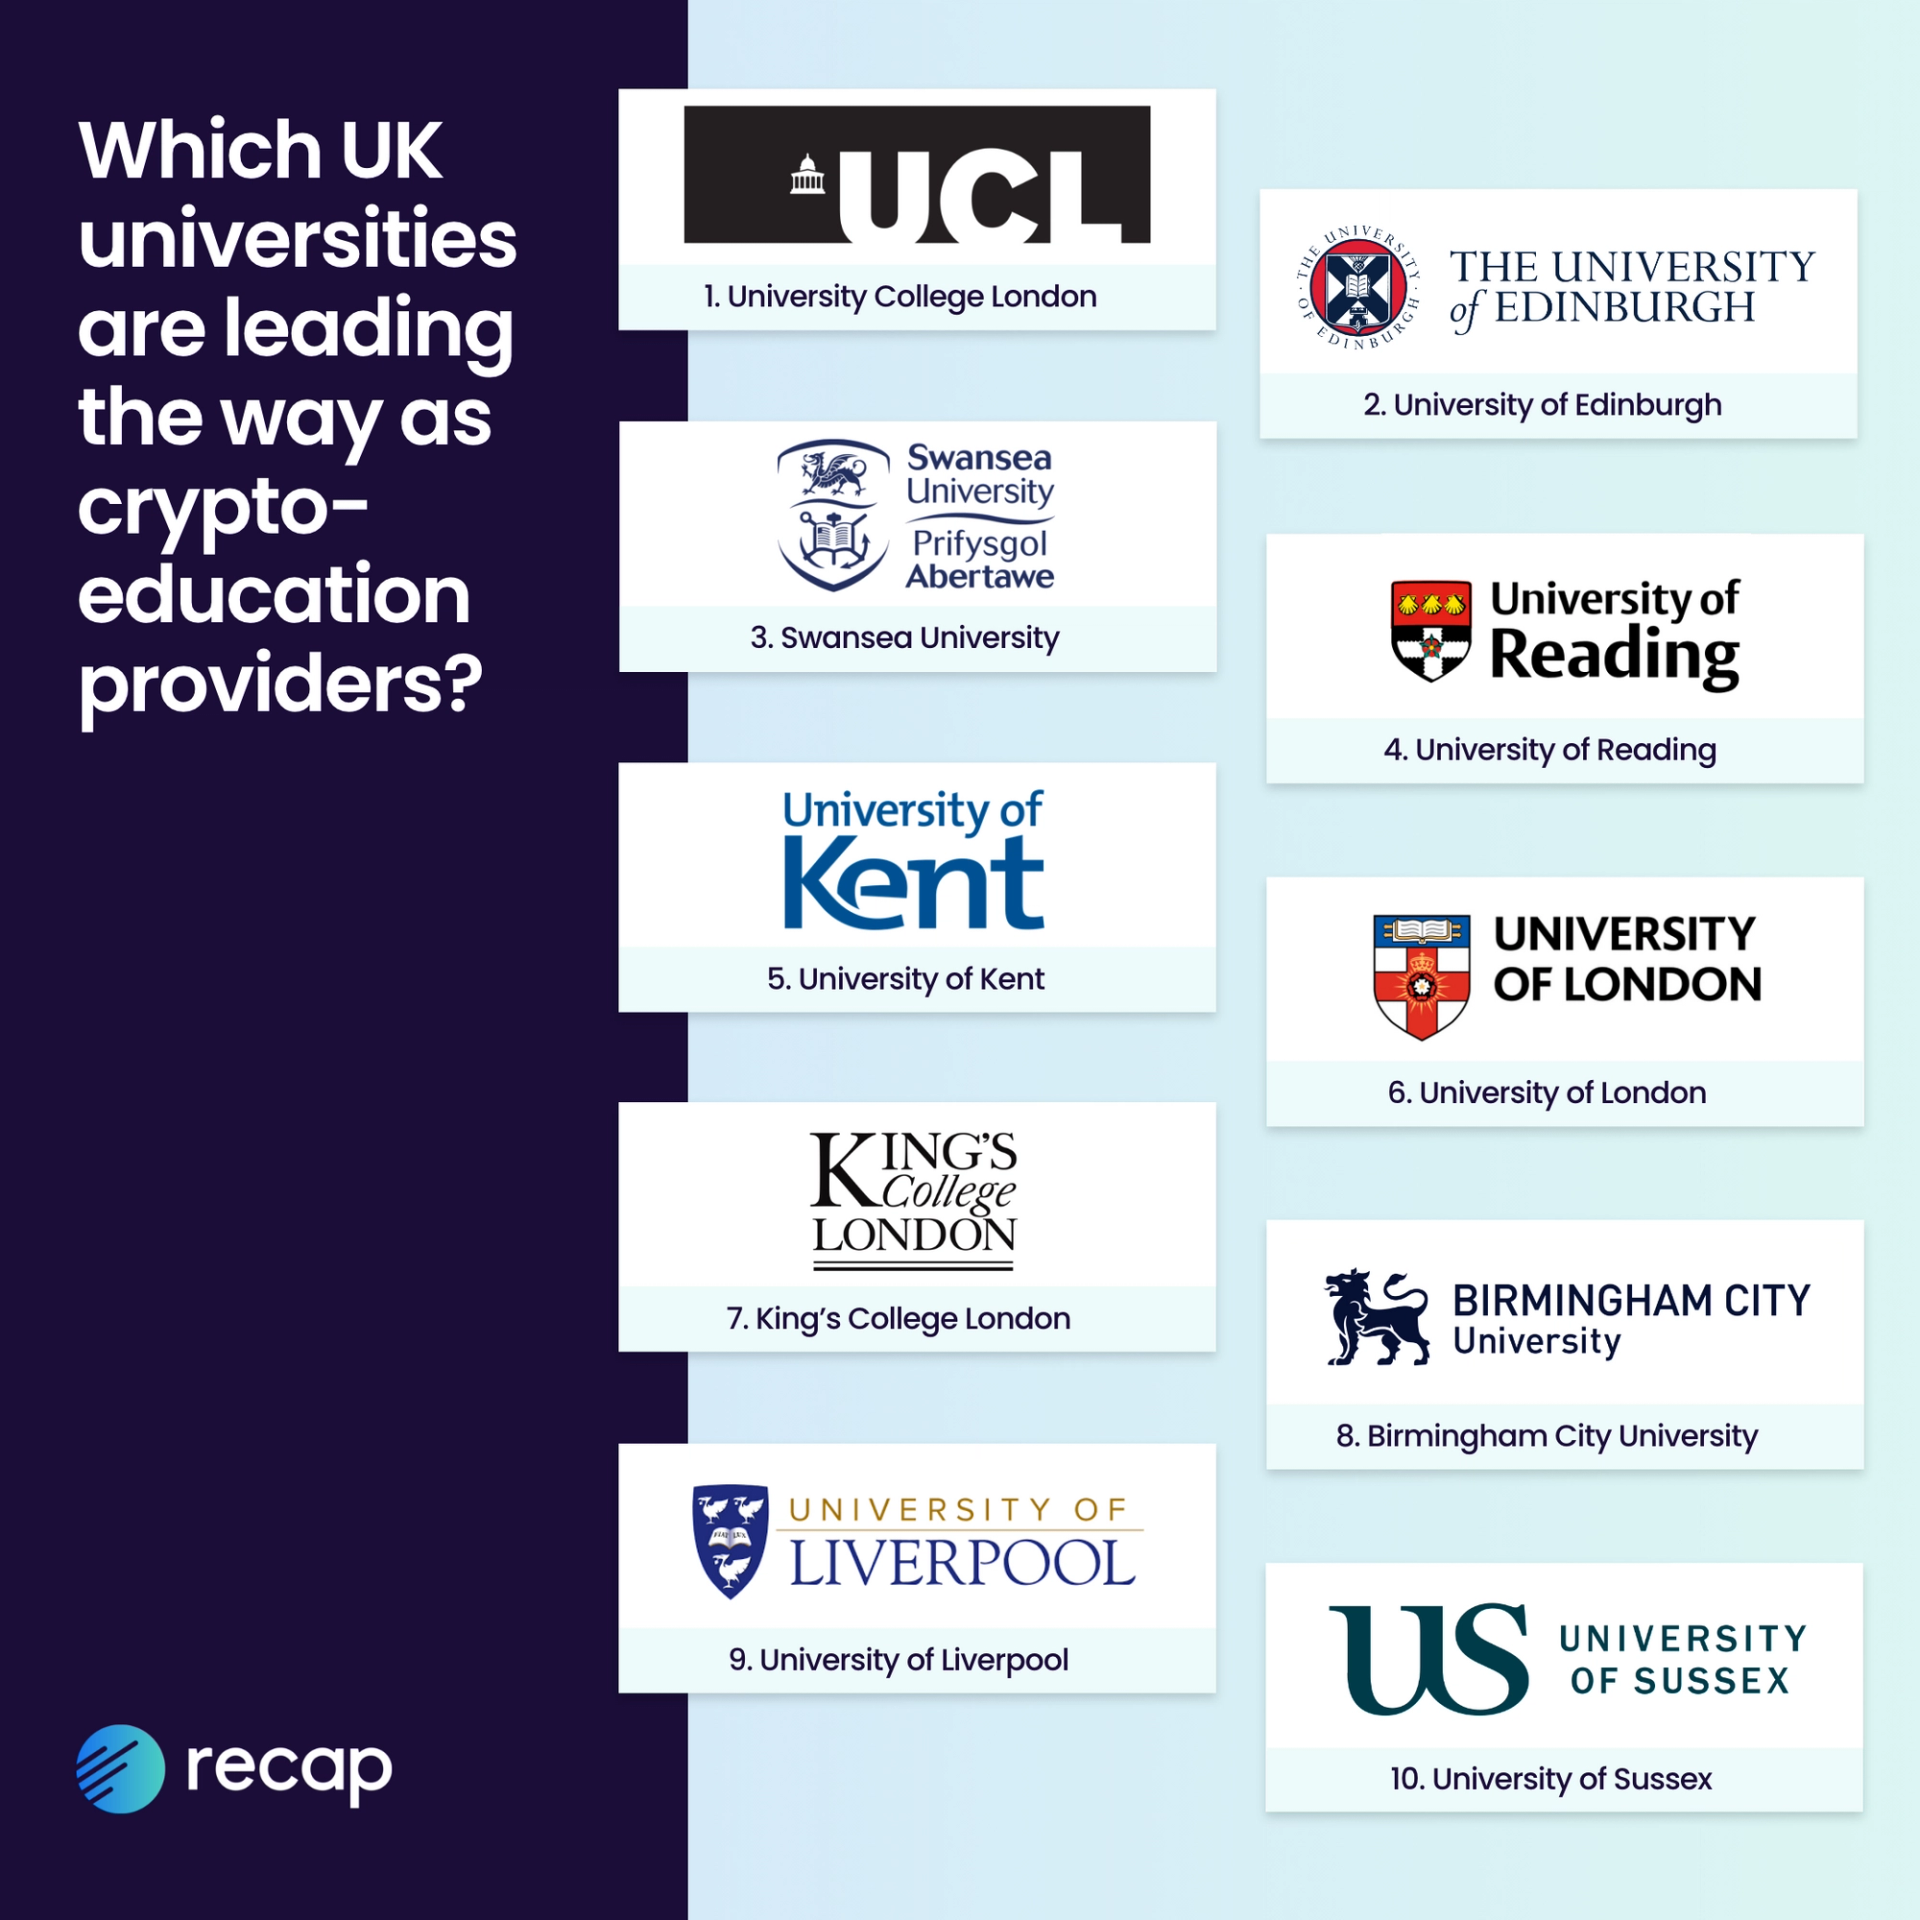 An infographic showing the top ten universities leading the way as crypto education providers according to Recap's study.